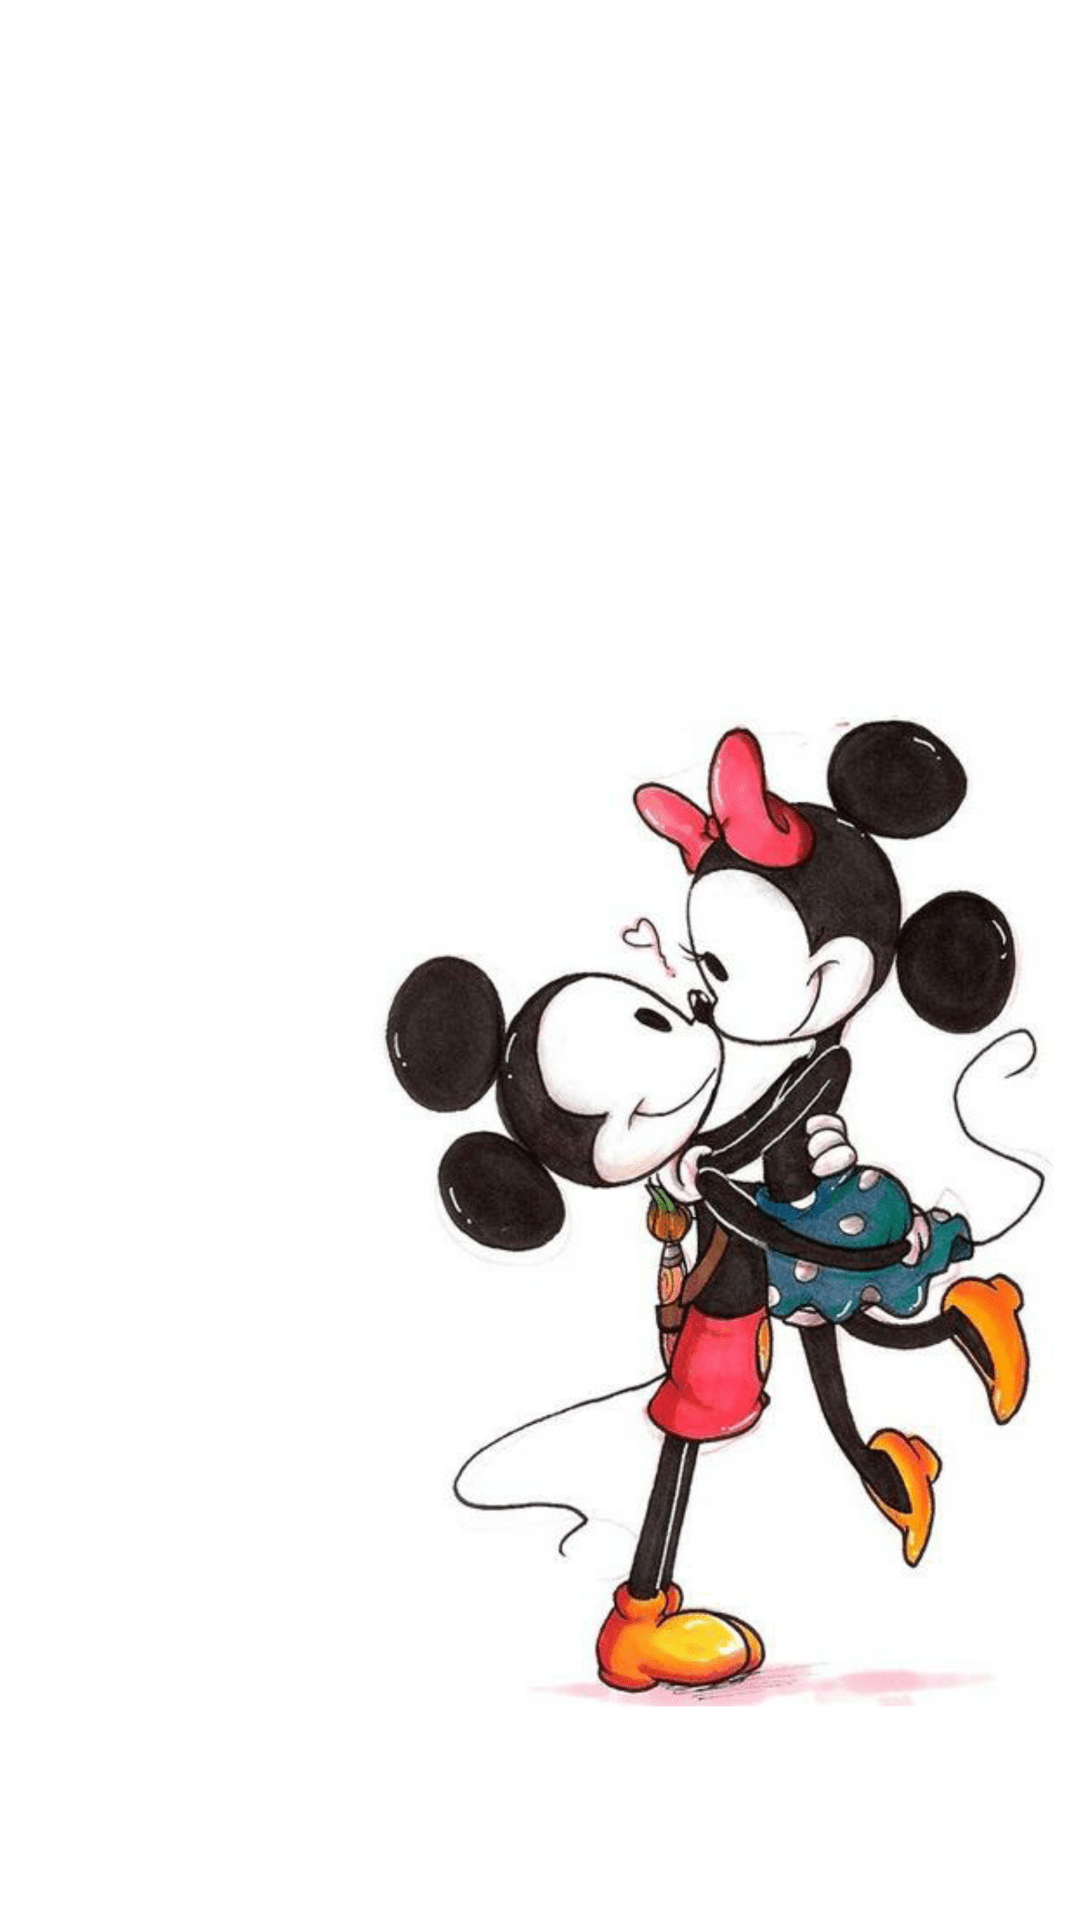 22 Mickey Mouse  Minnie Mouse  Phone Wallpaper ideas  mickey mouse  mickey disney wallpaper